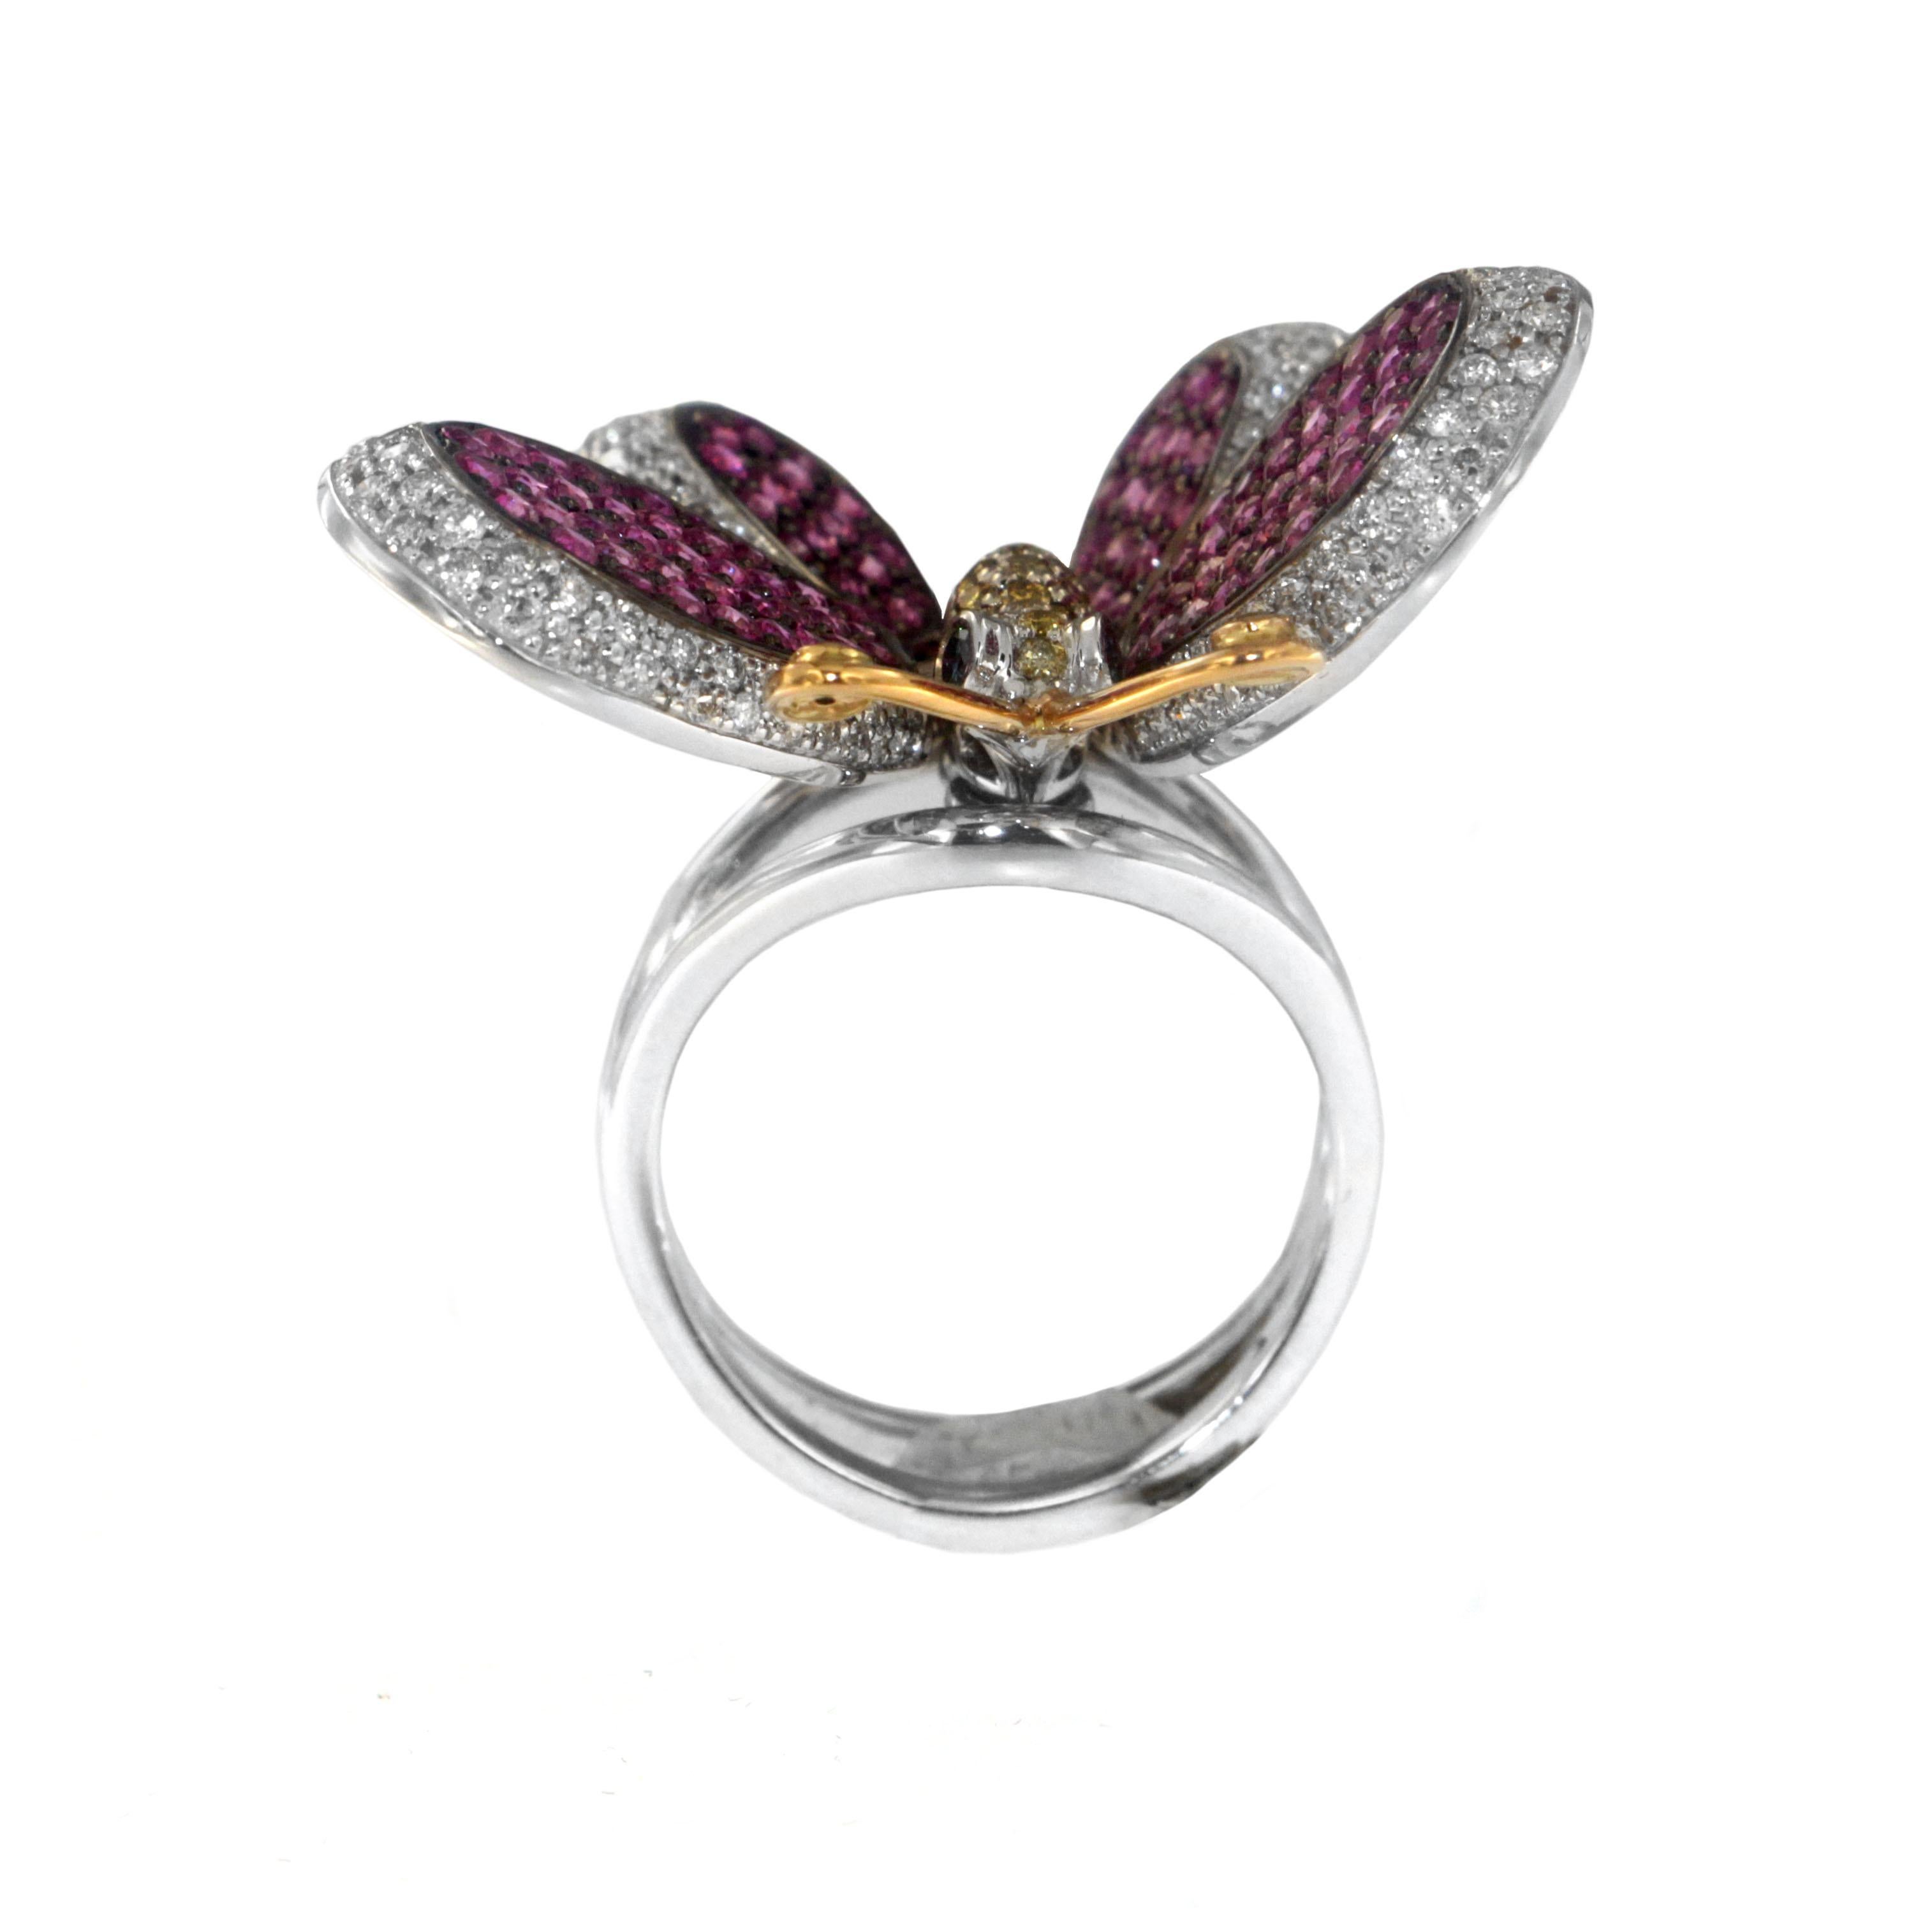 Show off your sense of style and whimsy with Zorab's playful butterfly cocktail ring meticulously hand-crafted with 2.69 Carat of Pink Sapphire, 1.28 Carats of White Diamonds, 0.32 Carats of Yellow Diamonds, 0.13 carats of Green Diamonds.

The wings